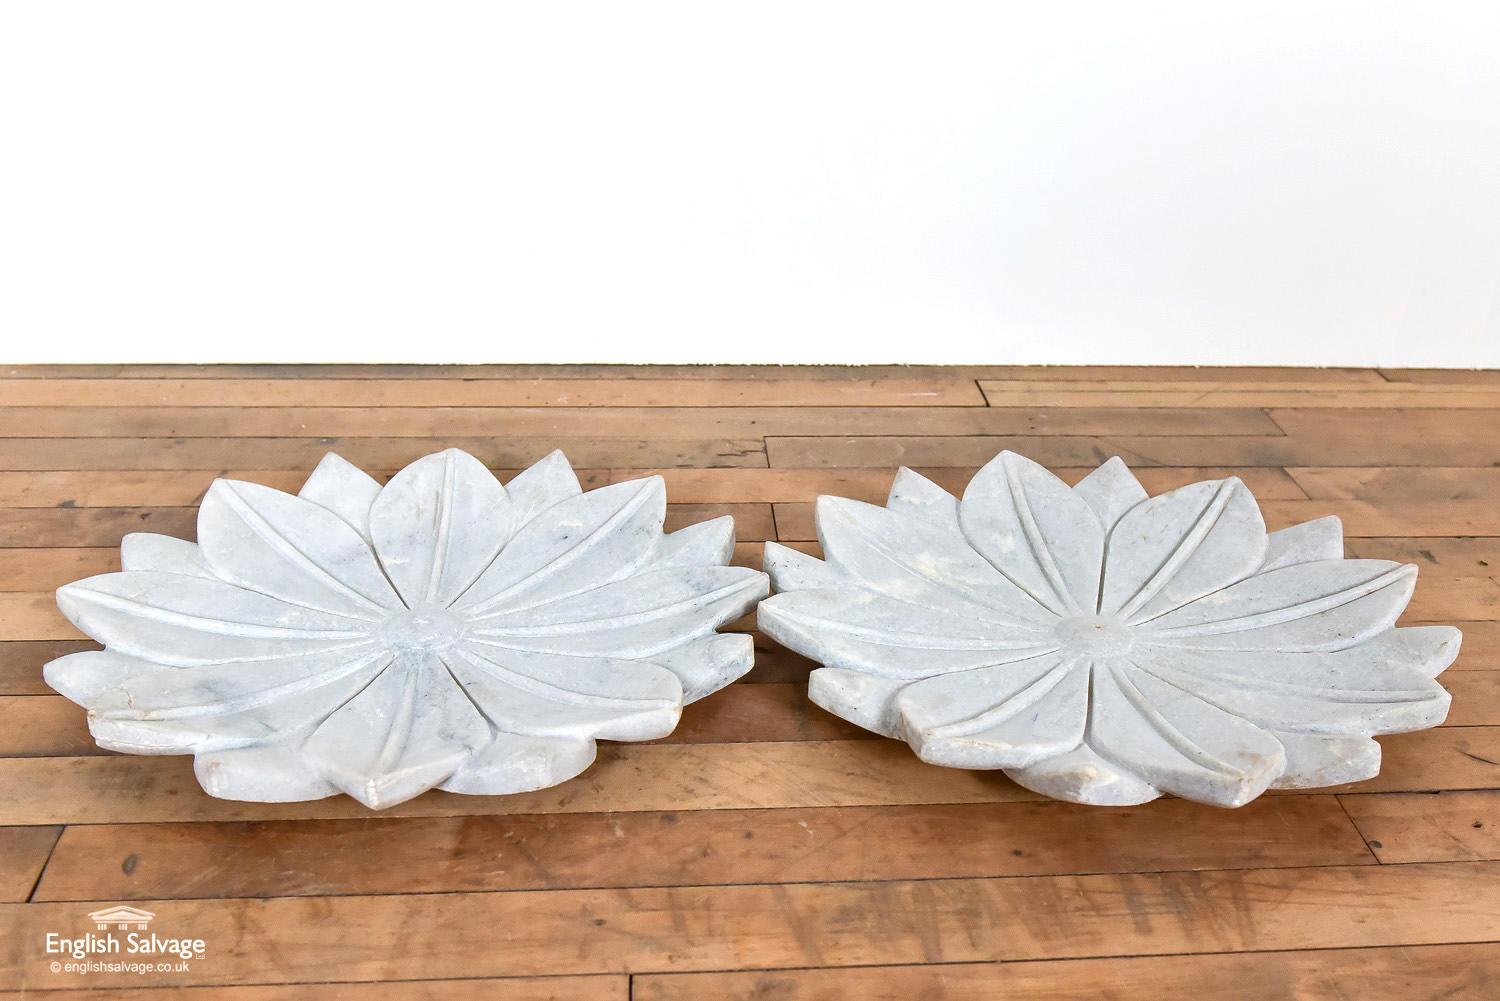 These exquisite marble plates are hand carved from marble in the shape of a lotus flower. The natural stone has marks and veins to it, and there is a crack along the vein at the edge of one of the petals.